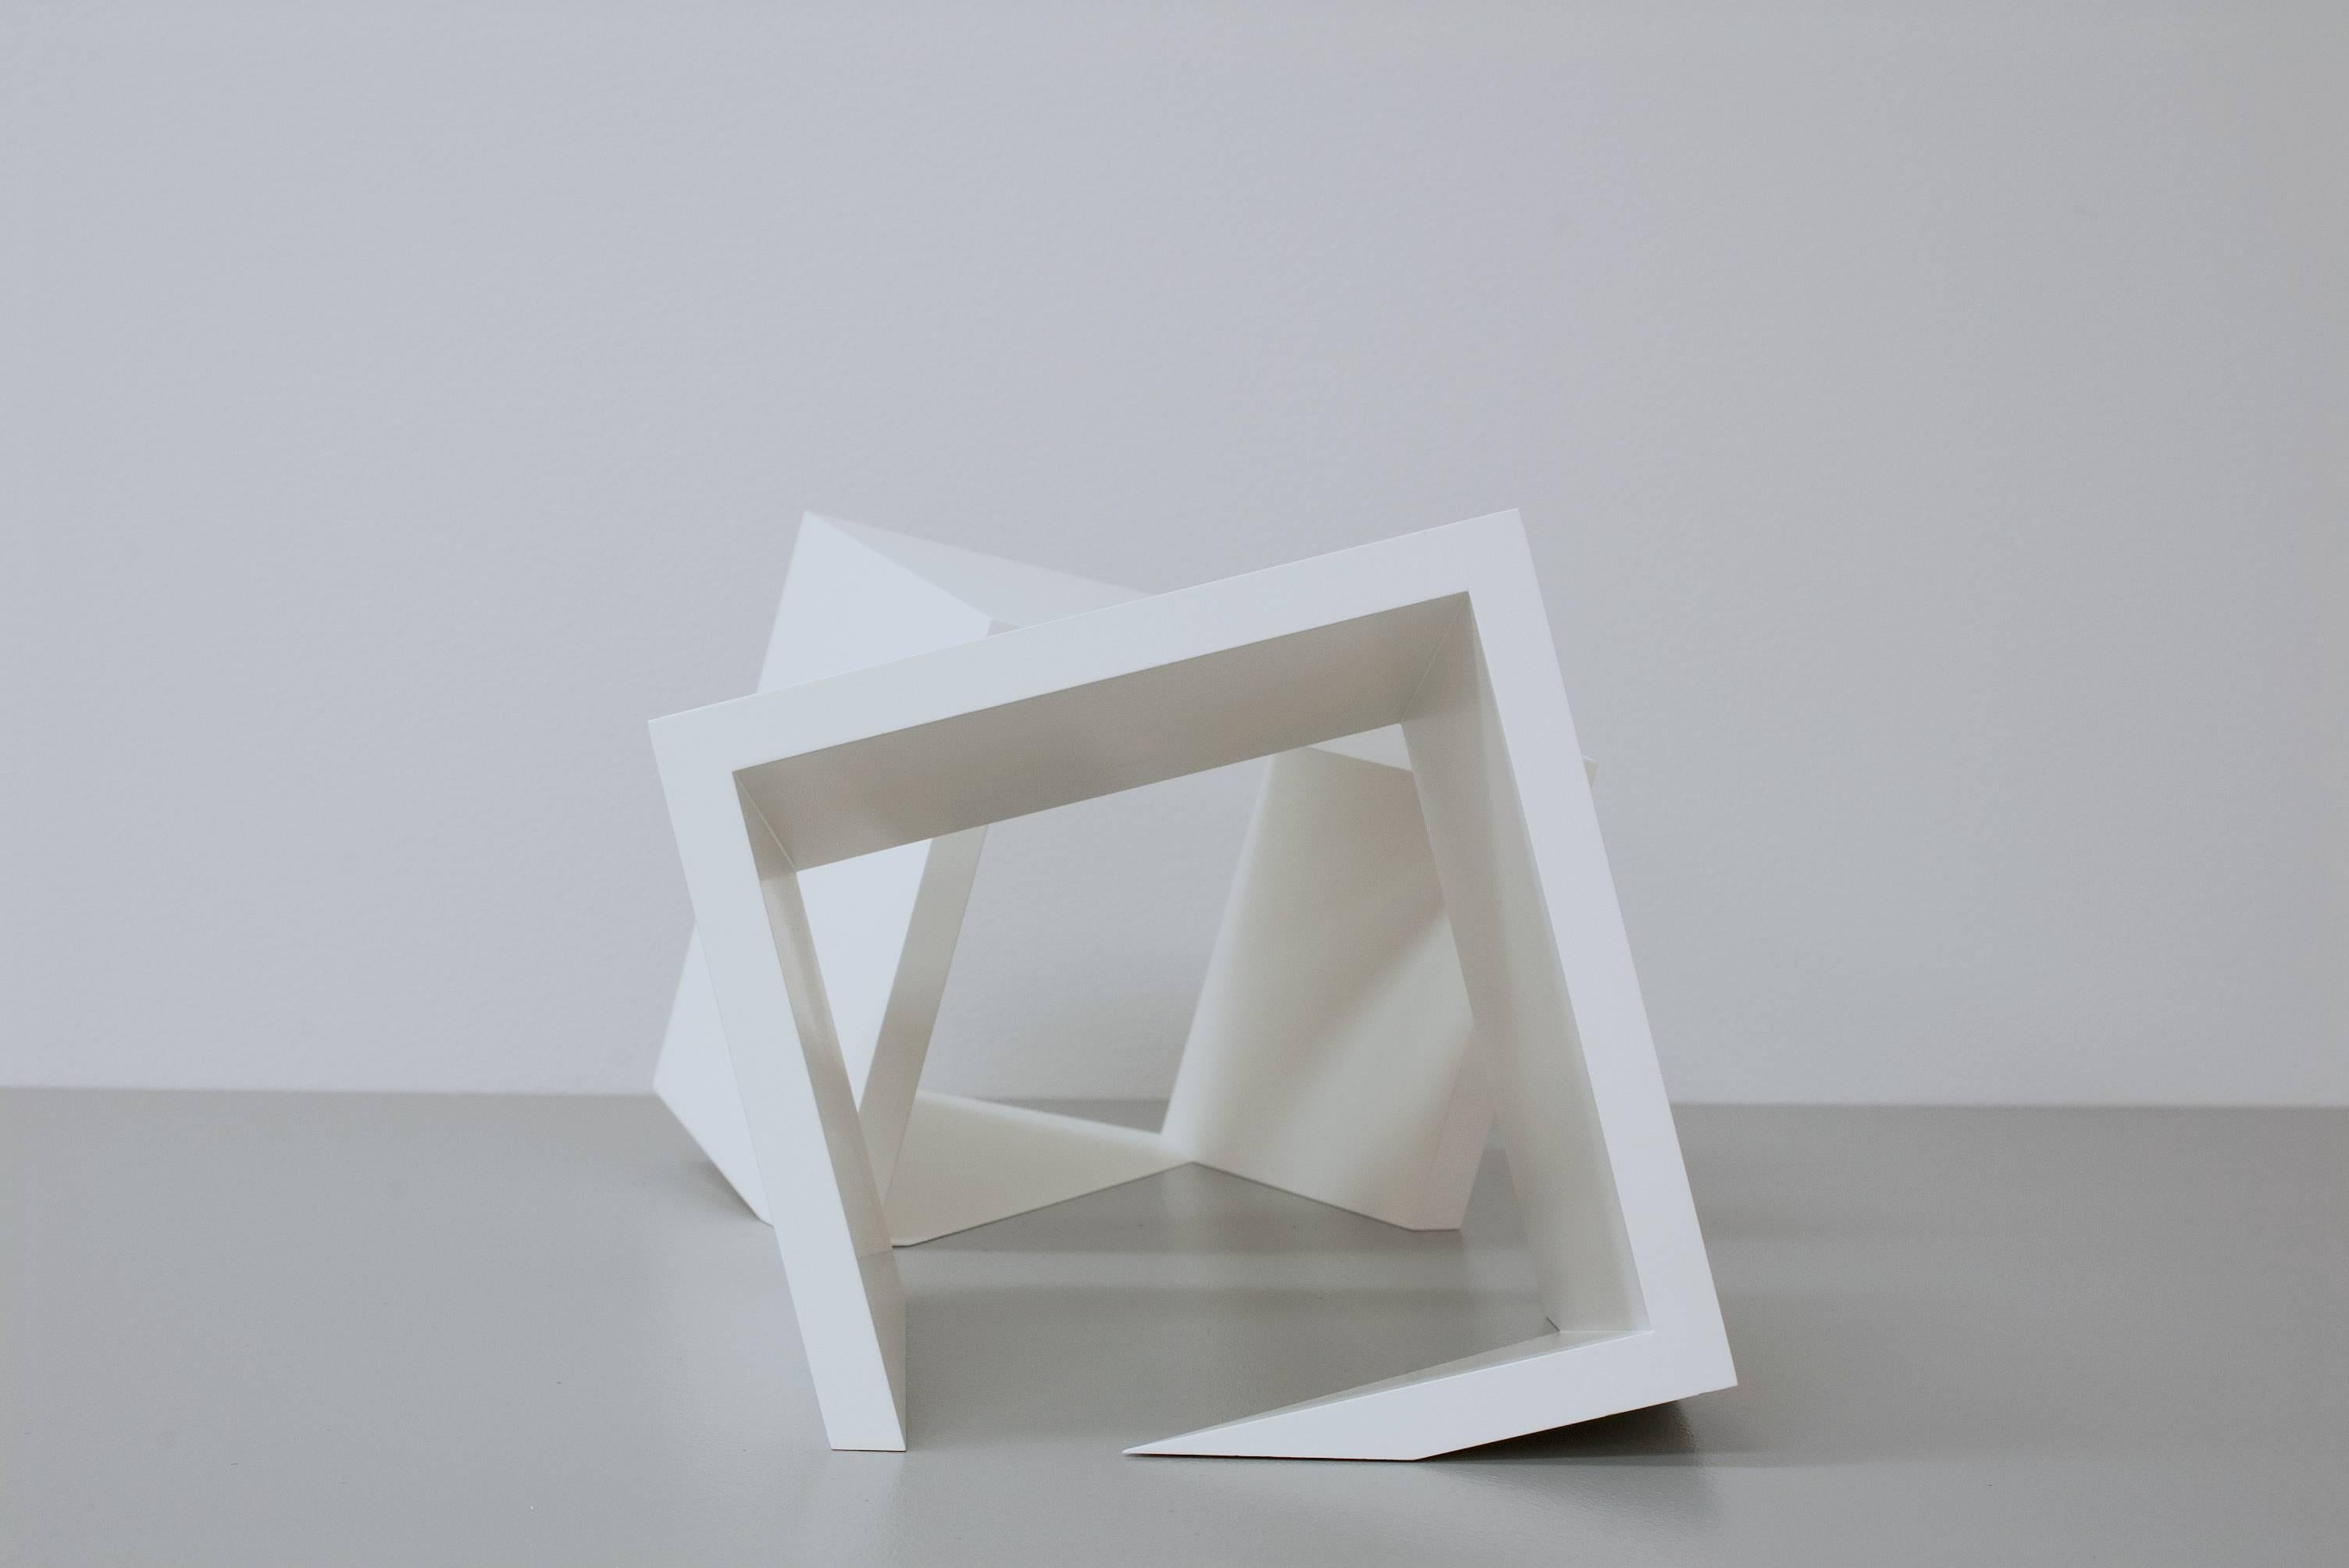 Thomas Lendvai Abstract Sculpture - Untitled (Cube Study)